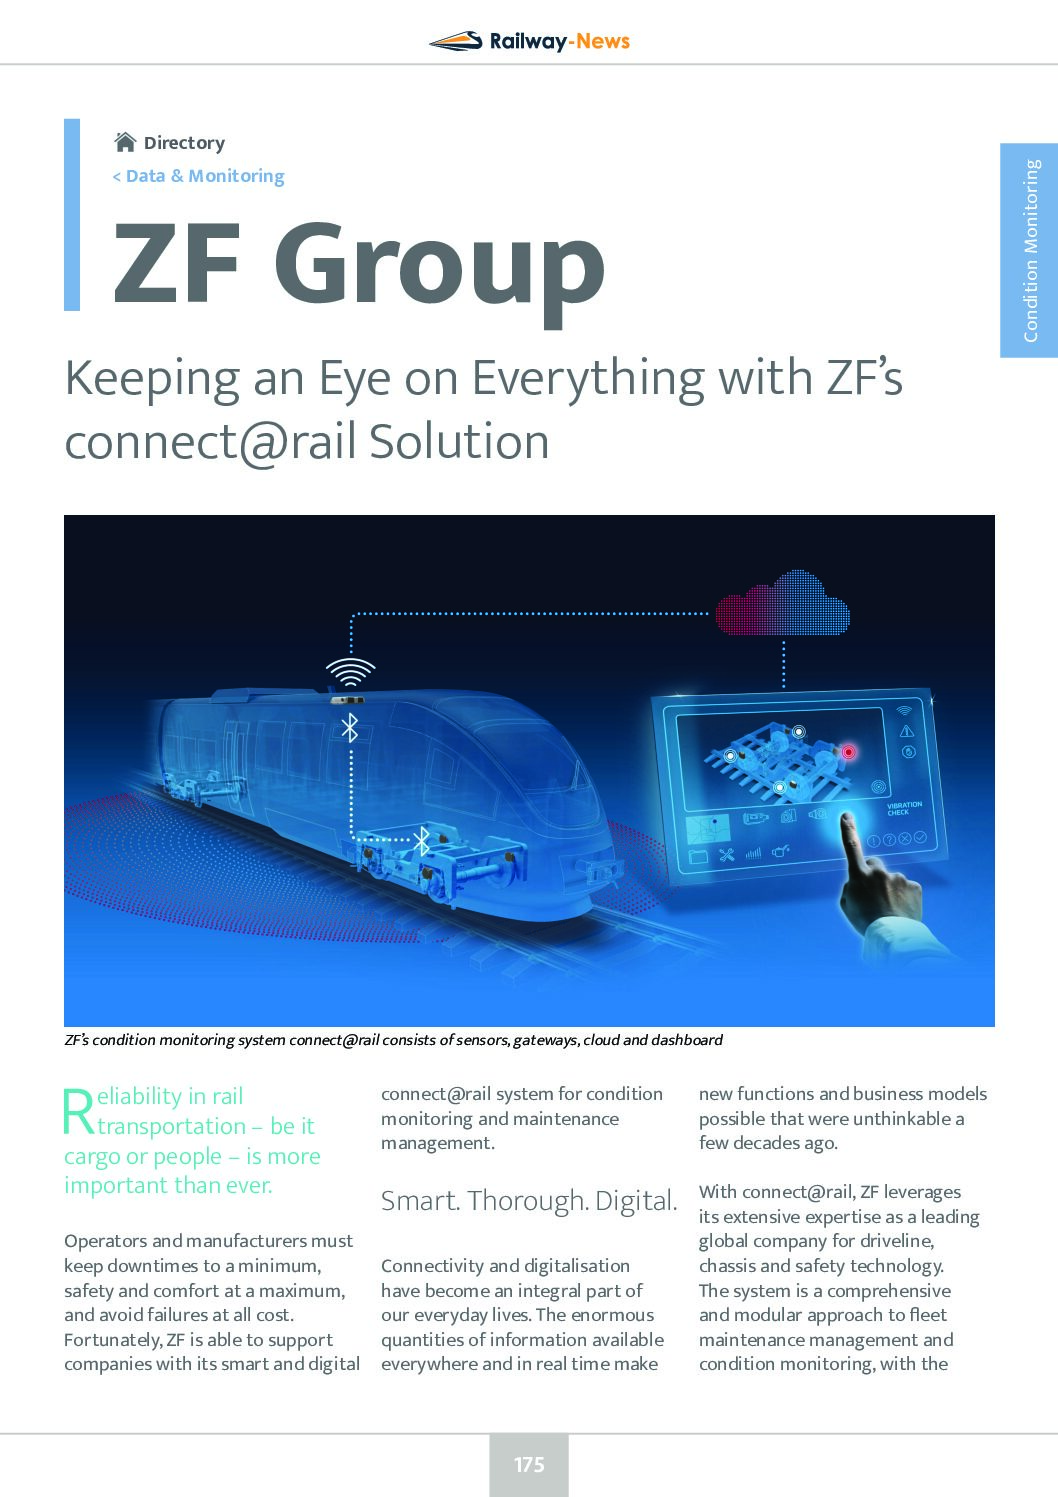 Keeping an Eye on Everything with ZF’s connect@rail Solution